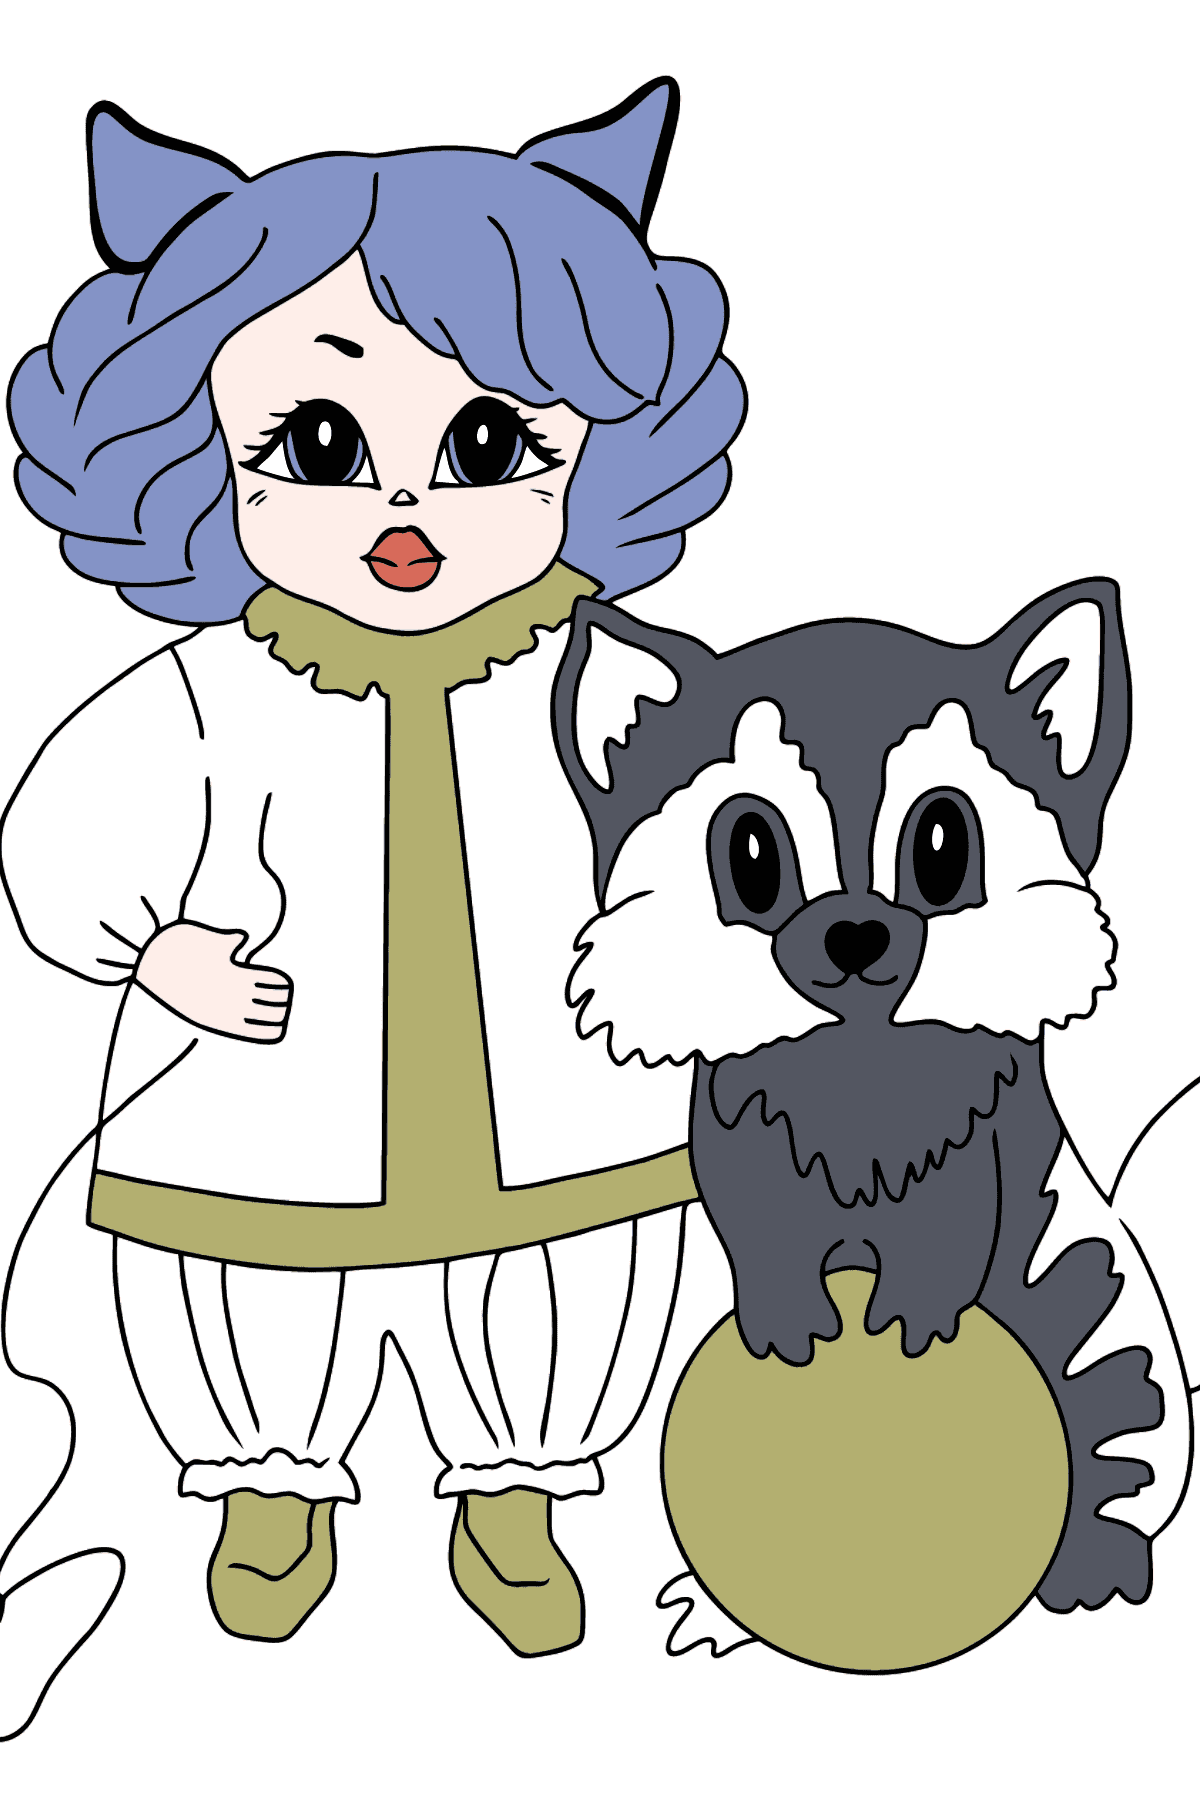 Coloring Picture - A Princess with a Cat and a Racoon - Coloring Pages for Kids